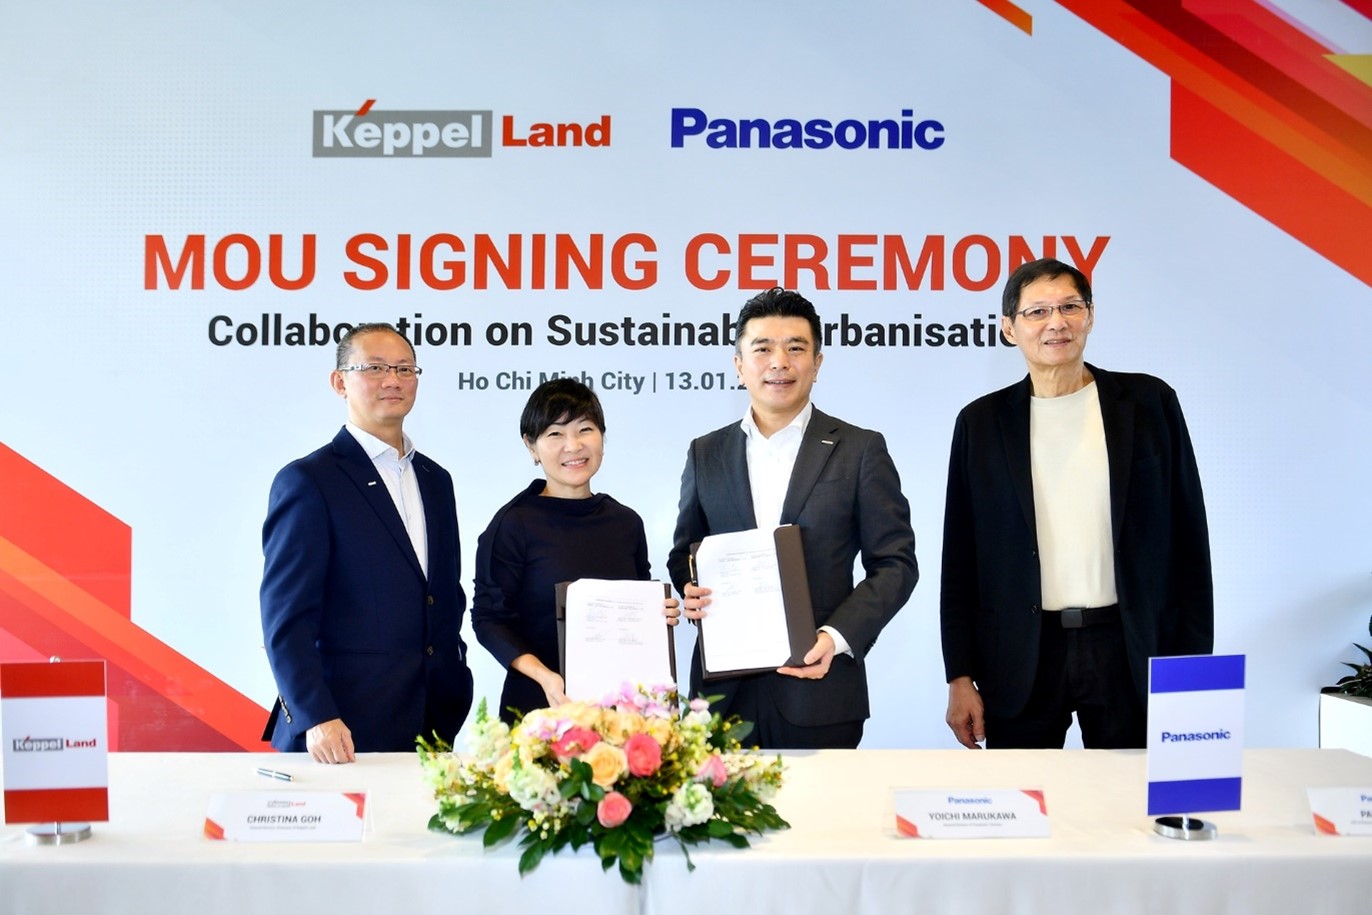 Image: Representatives from Keppel Land Vietnam and Panasonic Vietnam  at the MOU signing ceremony.